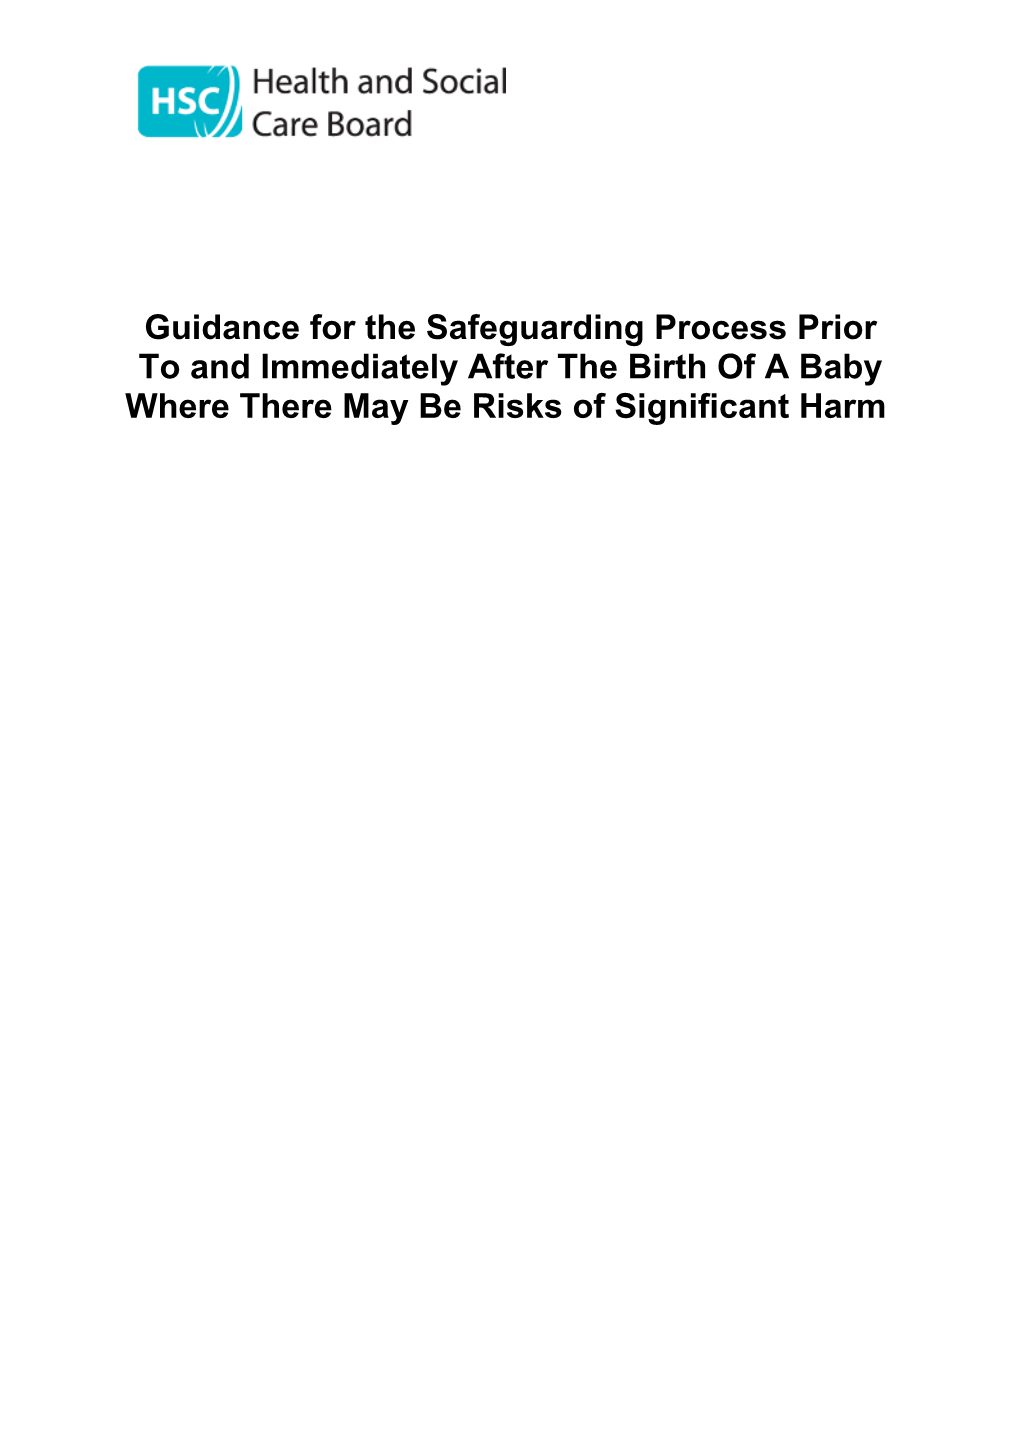 Guidancefor the Safeguarding Process Prior to and Immediately After the Birth of a Baby